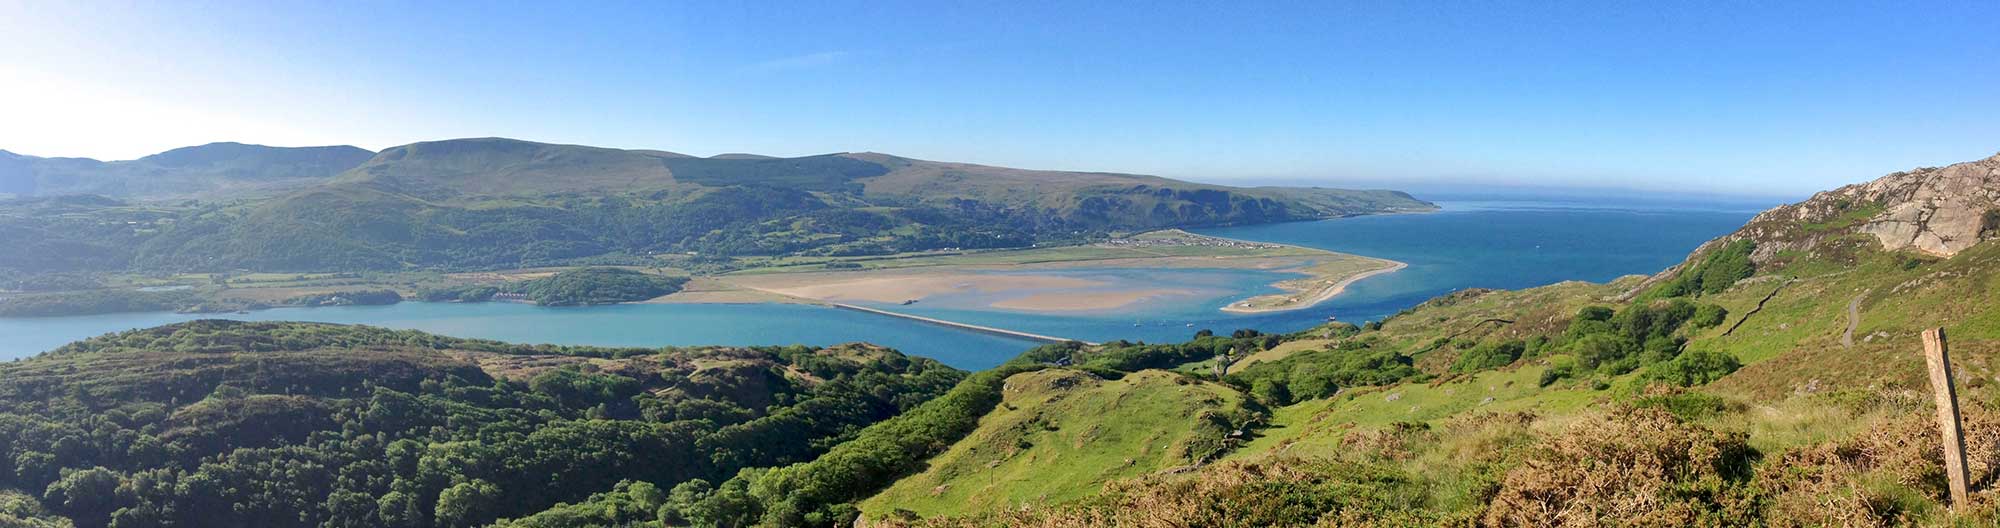 The Mawddach Estuary from the Hills Above Barmouth